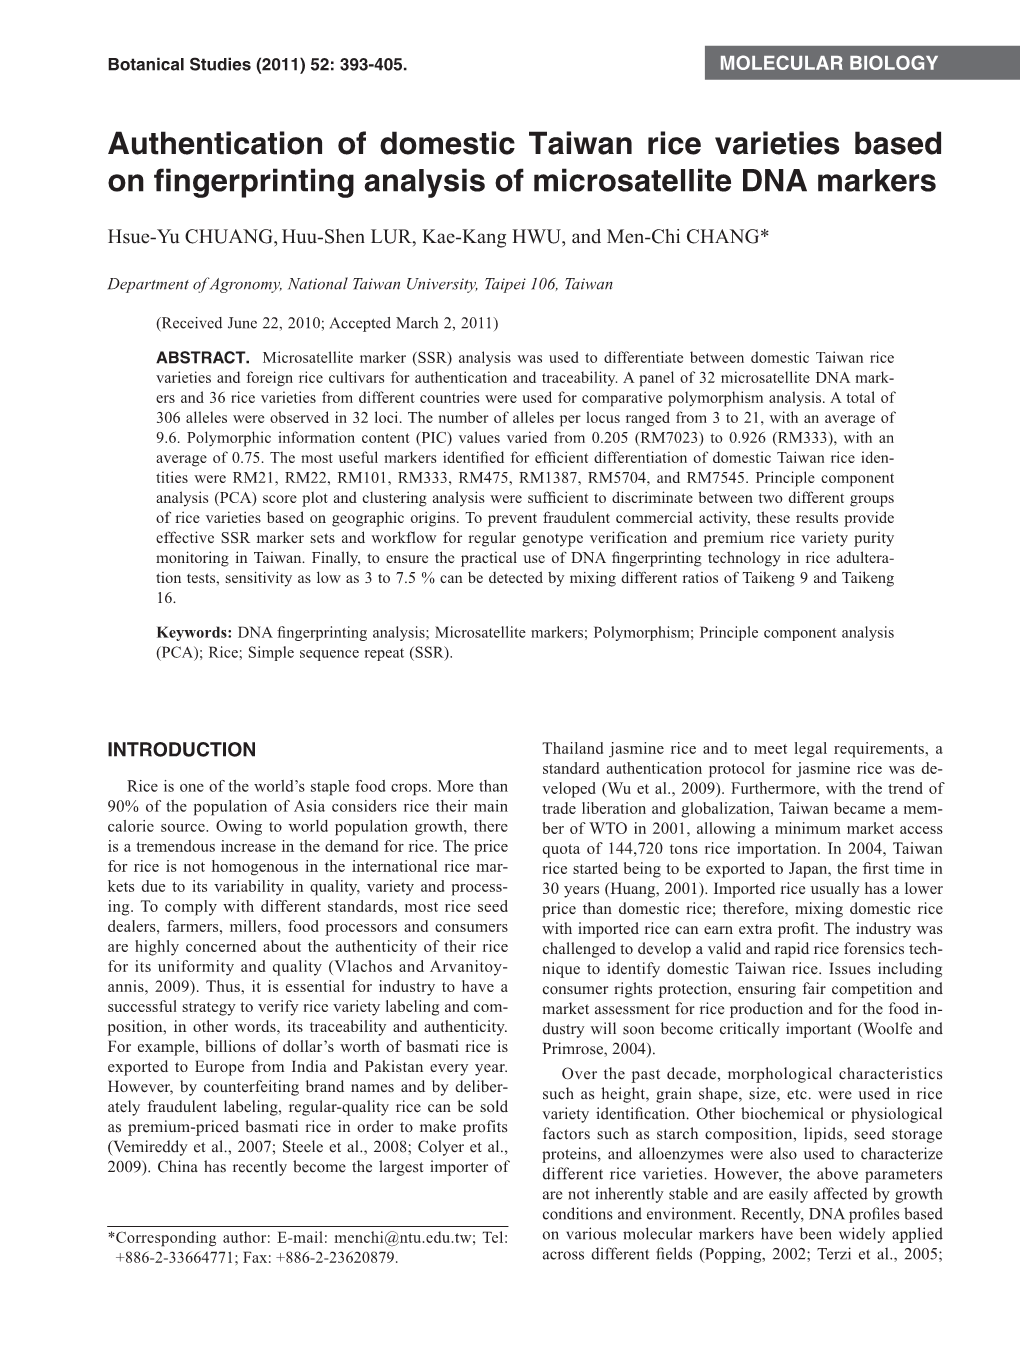 Authentication of Domestic Taiwan Rice Varieties Based on Fingerprinting Analysis of Microsatellite DNA Markers